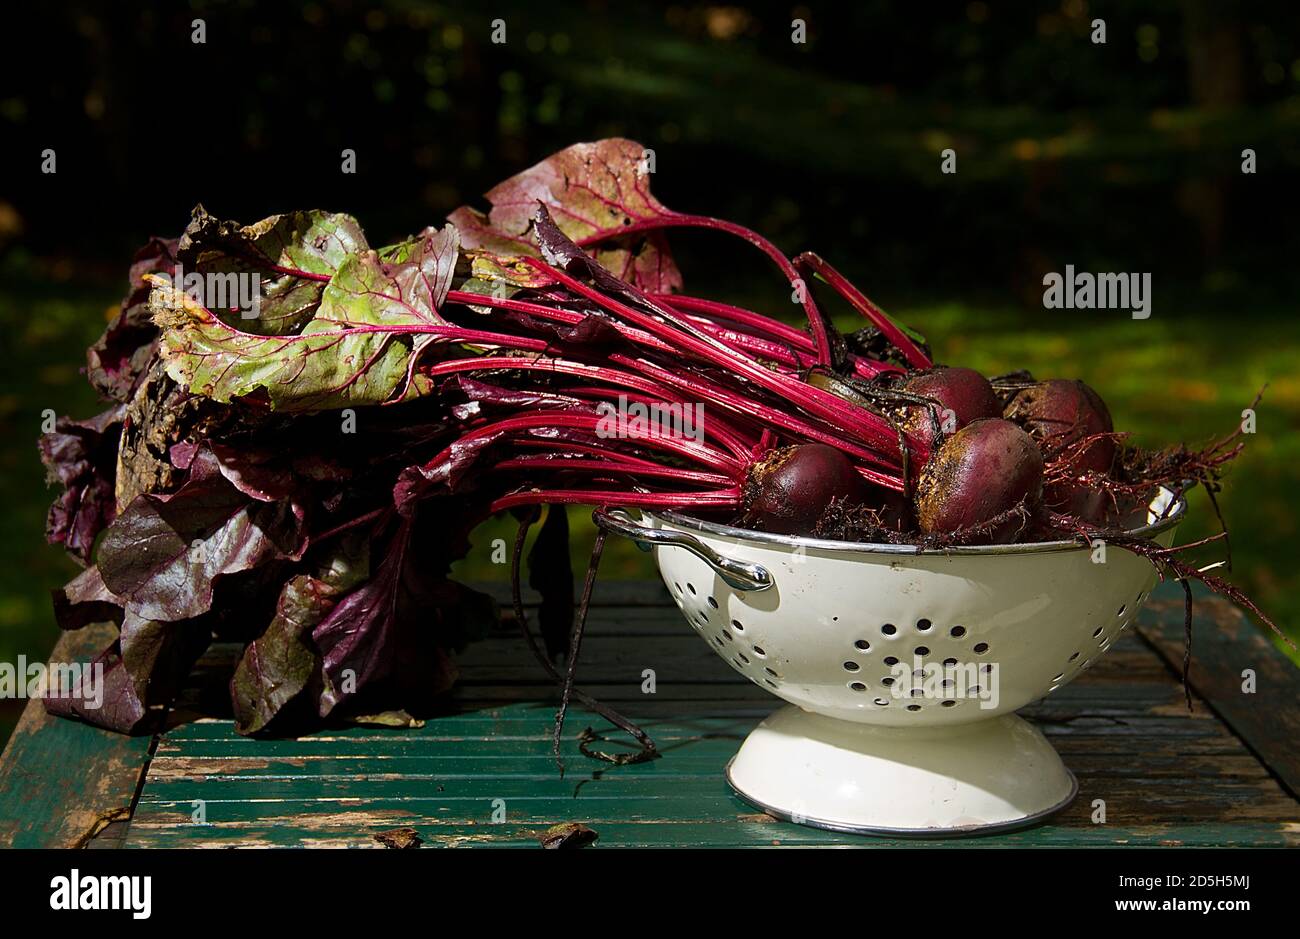 Beetroot, just harvested, fresh from the soil, in a white colander on a weathered wooden table Stock Photo